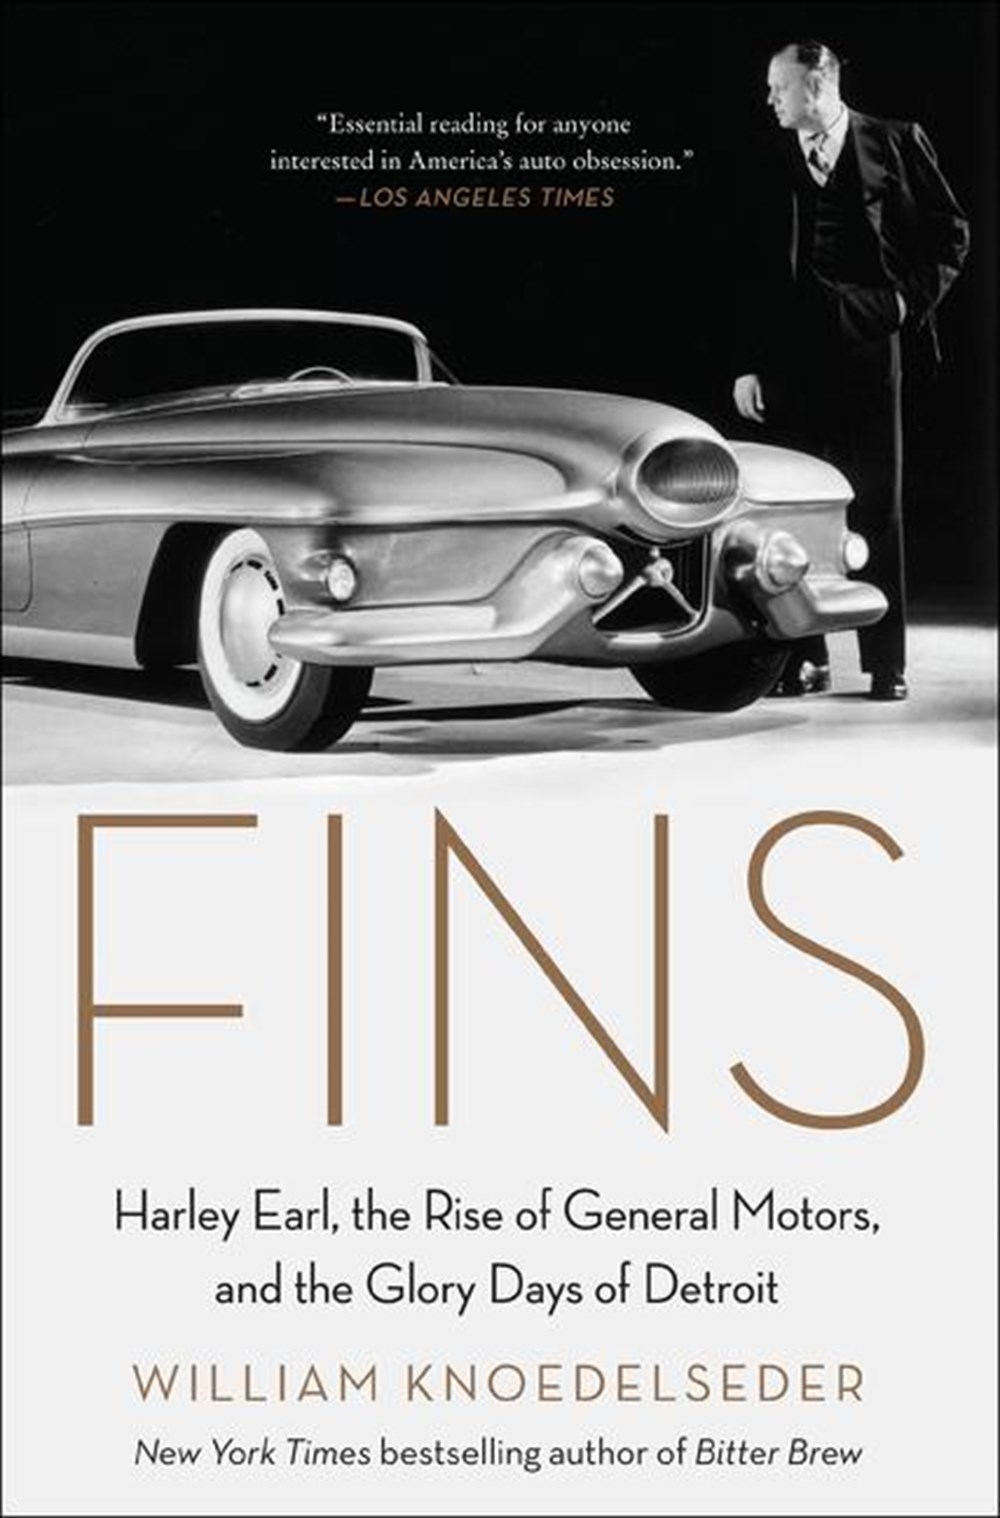 Fins Harley Earl, the Rise of General Motors, and the Glory Days of Detroit